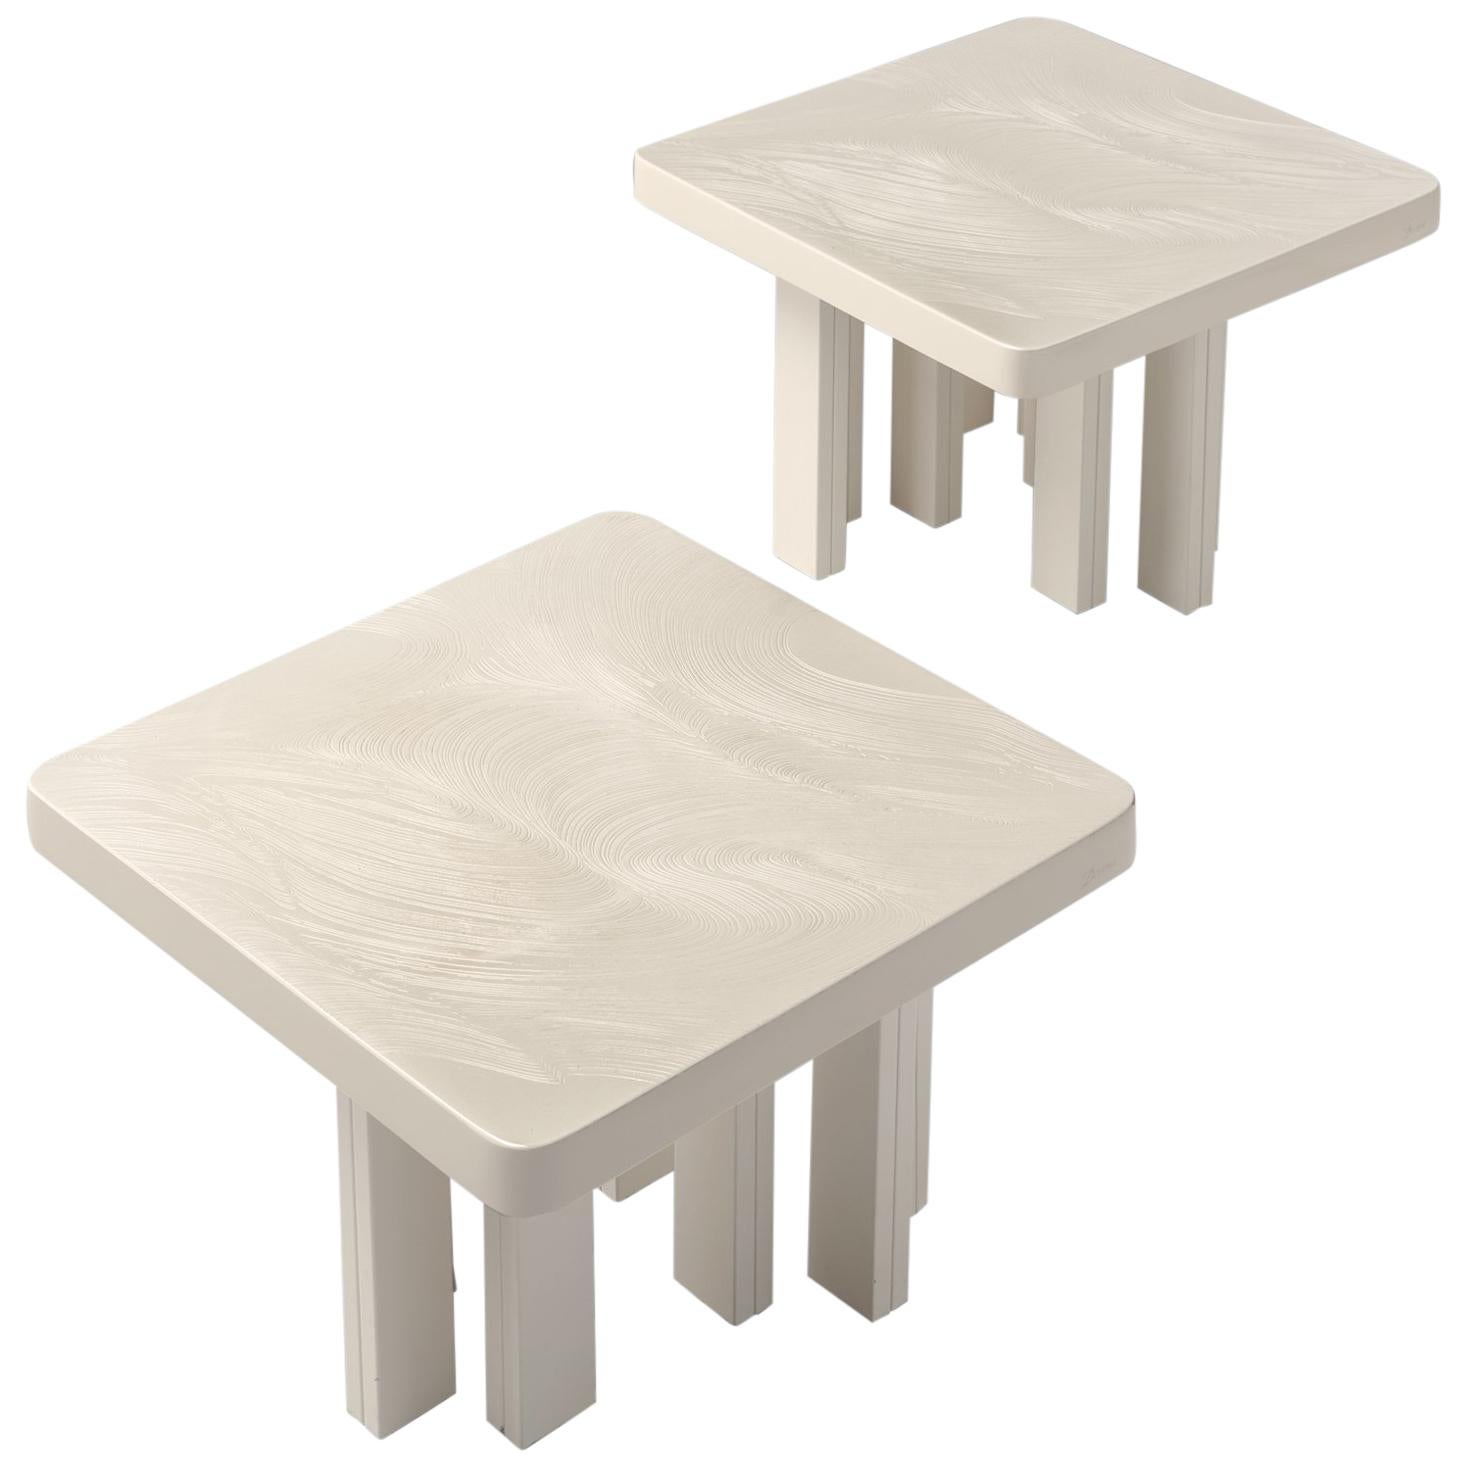 Jean Claude Dresse Pair of Resin Coffee Tables with Hand Drawn Pattern